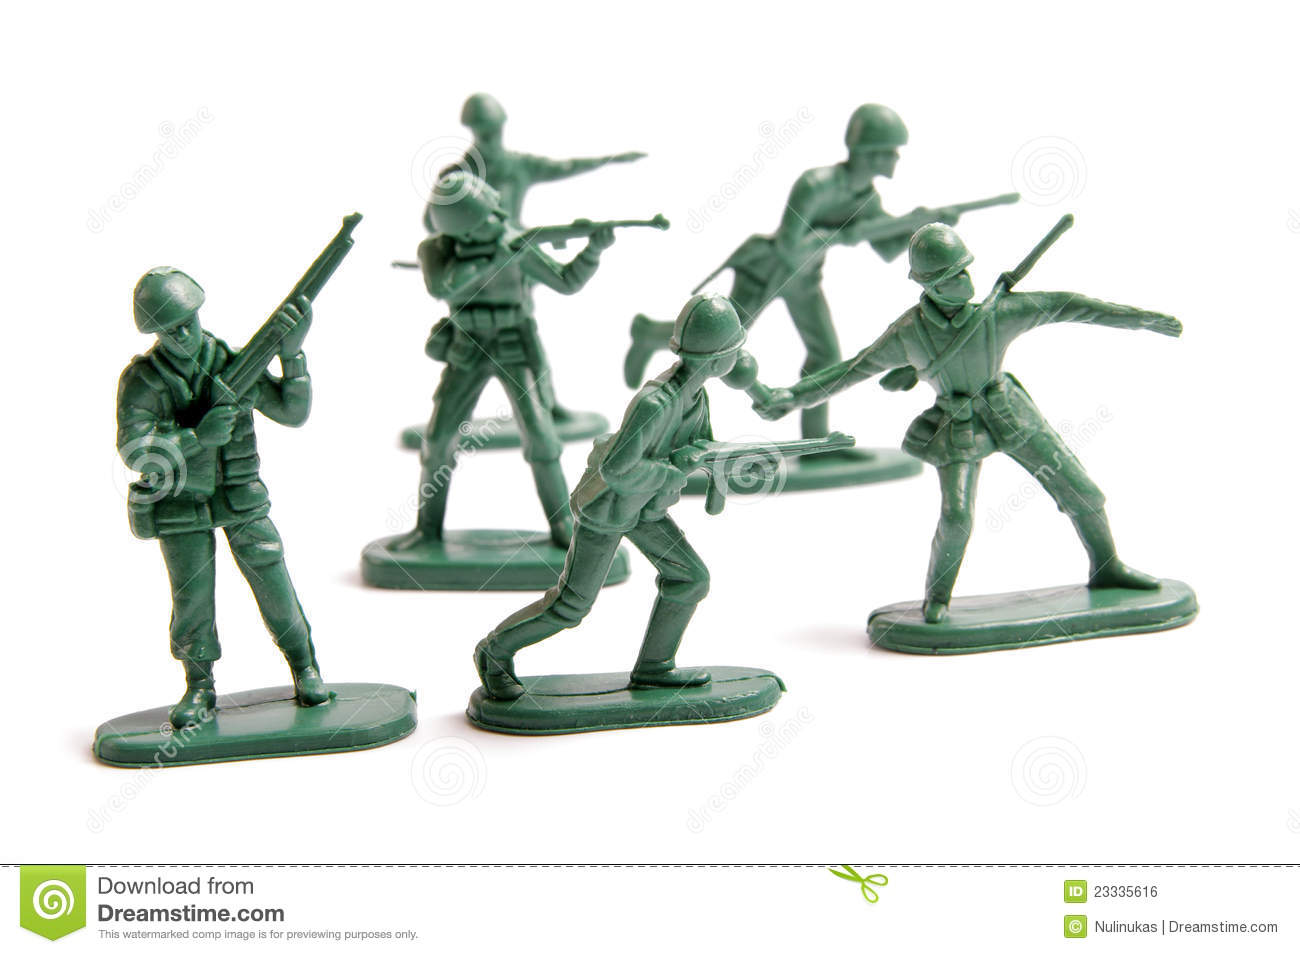 Green Toy Army Royalty Free Stock Image   Image  23335616